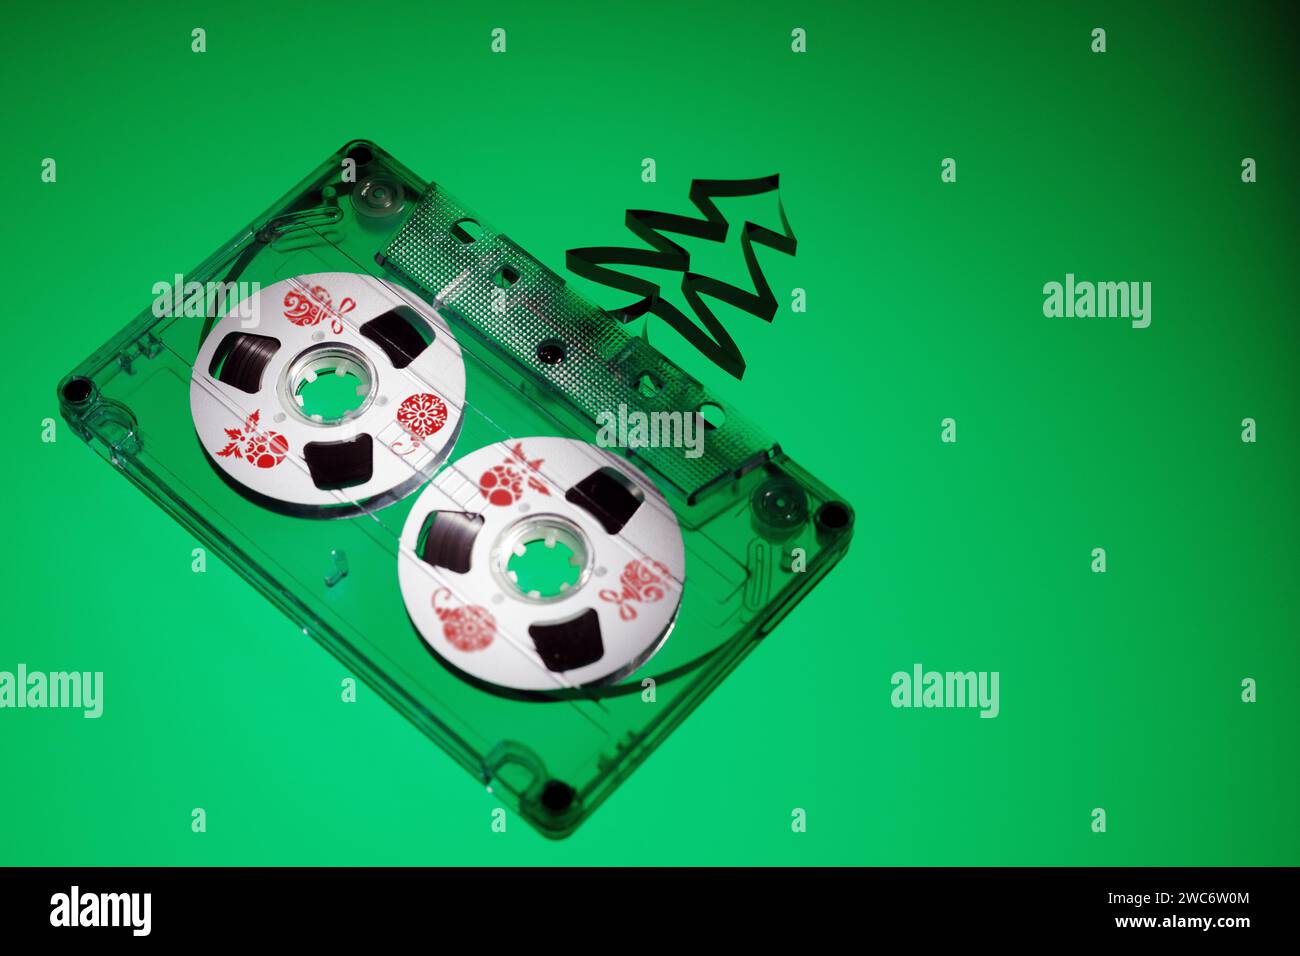 1980's audio cassette with white discs decorated with chritmas toys pictures on a green background with free space for Christmas themed text. Stock Photo